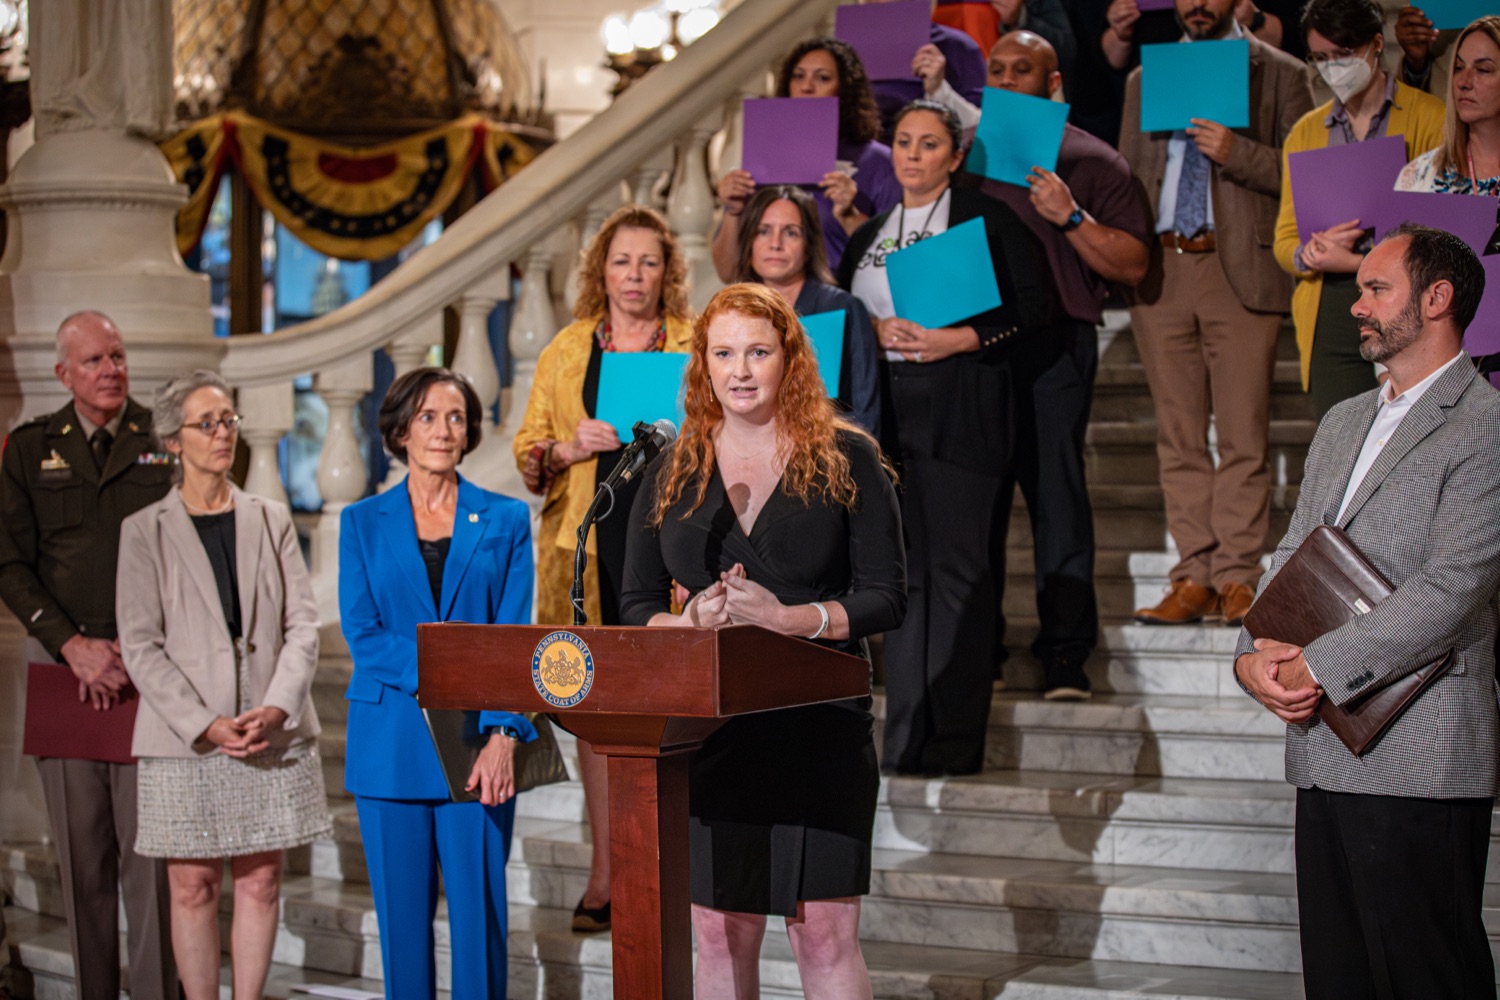 Hannah Metzger, member of Prevent Suicide PA, speaks at Pennsylvanias Suicide Prevention Month Press Conference at the State Capital in Harrisburg, PA.<br><a href="https://filesource.amperwave.net/commonwealthofpa/photo/23696_dhs_suicidePrevention-27.jpg" target="_blank">⇣ Download Photo</a>